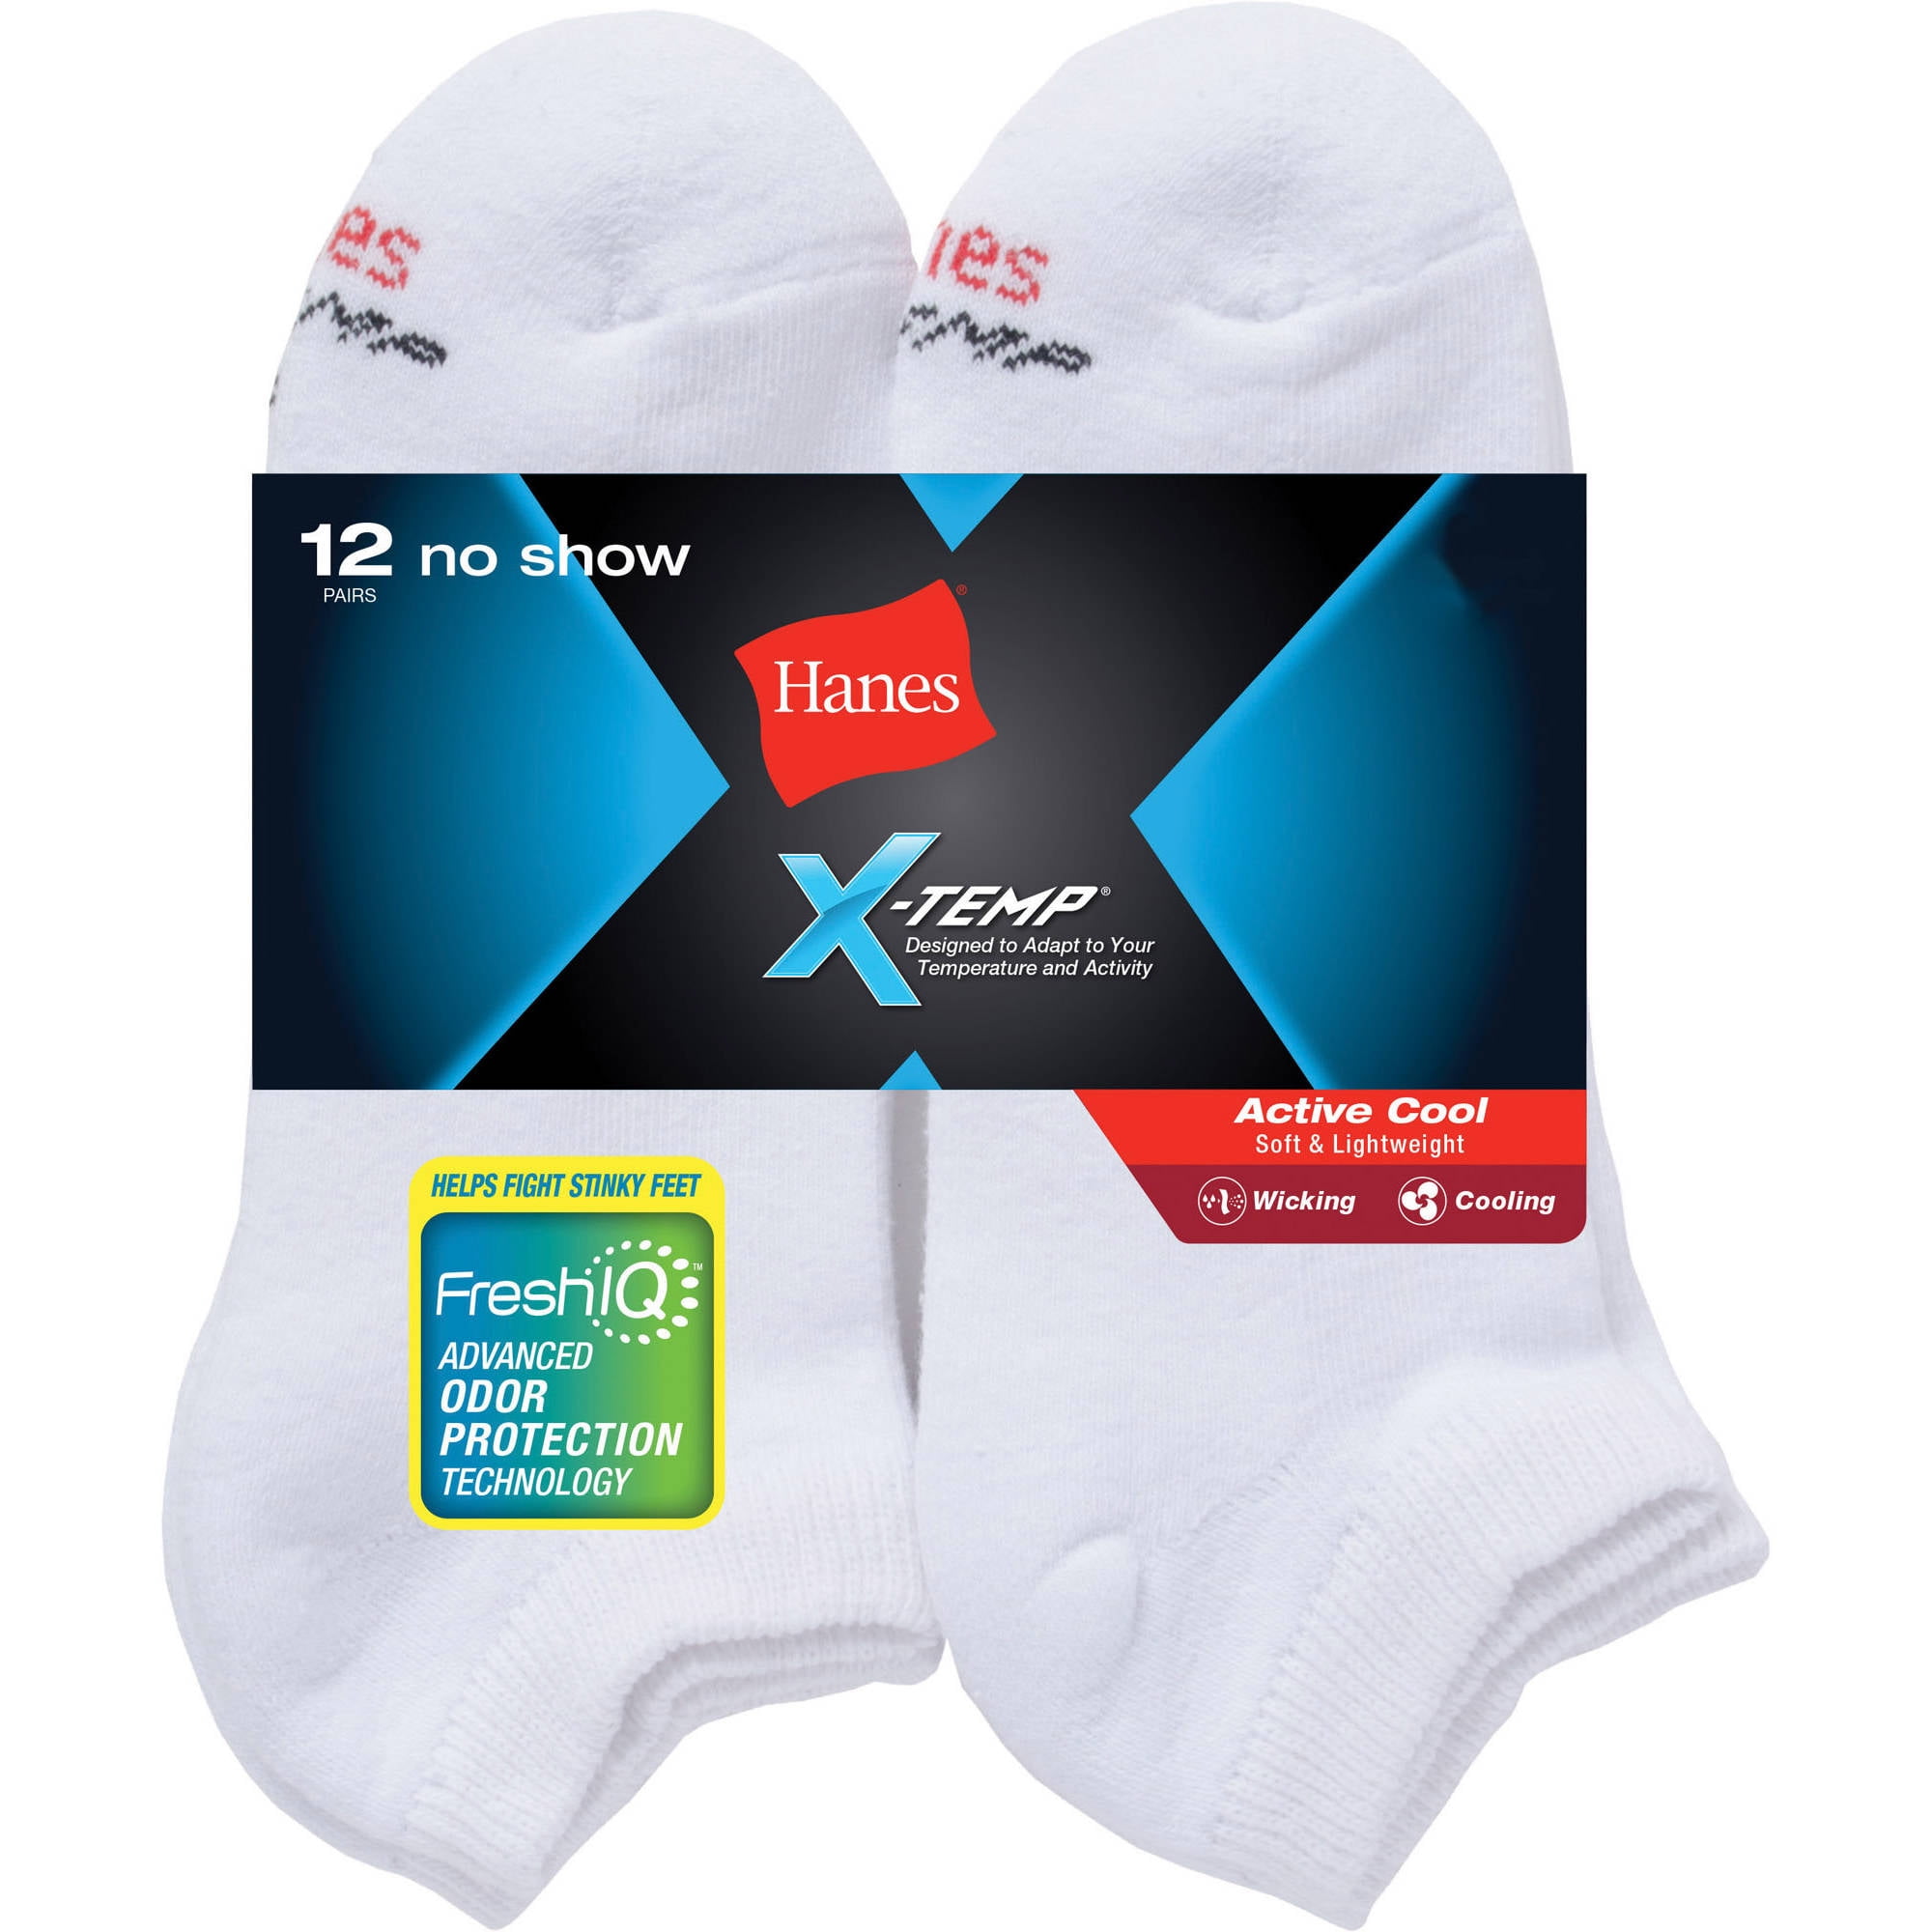 4-Pack Hanes Men's X-Temp Active Cool Ankle Socks ASSORTED ALL SIZES 